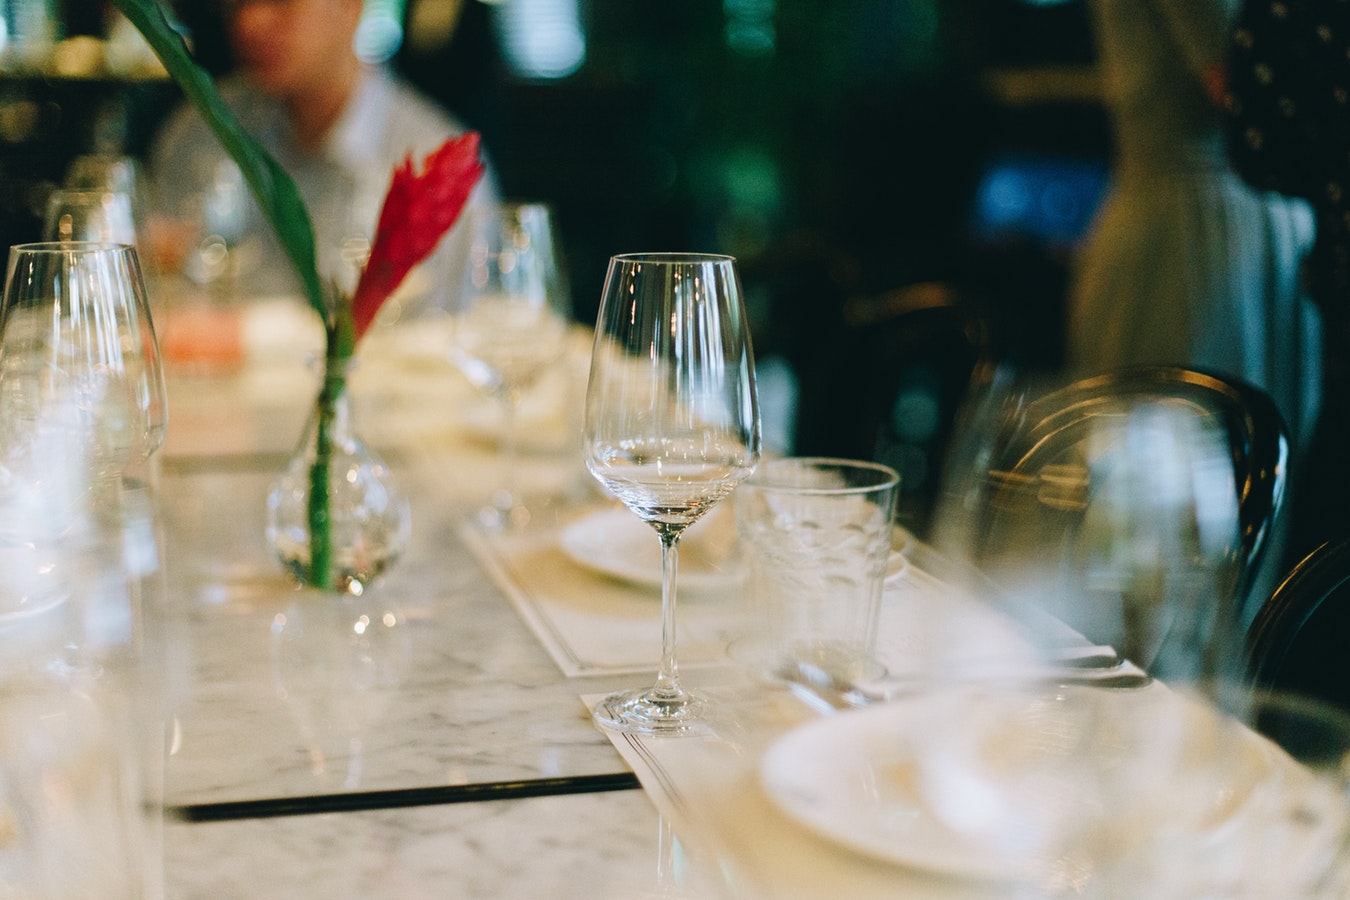 À la Carte Dining in a Banquet Setting: Is it Feasible? | Boston  Hospitality Review